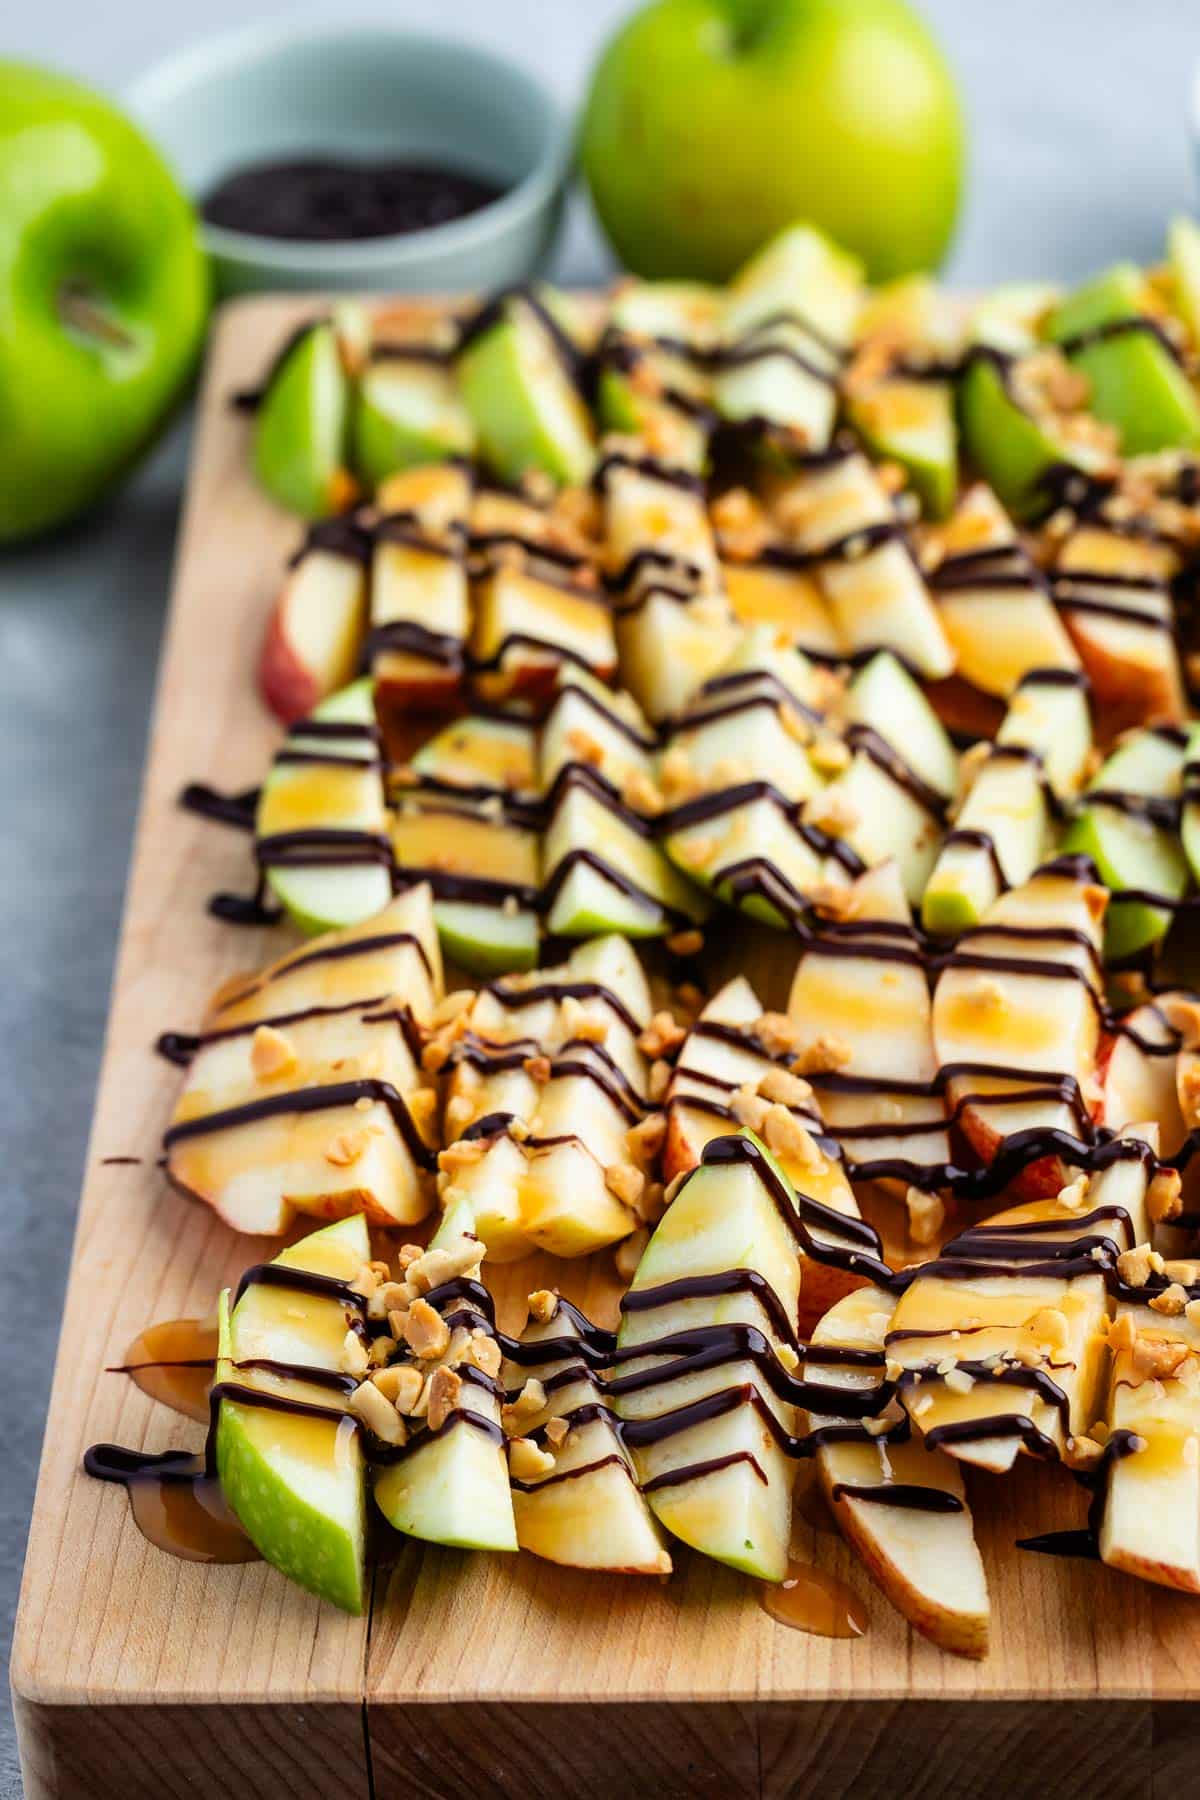 chopped apples on a cutting board with chocolate sauce dripped on top.